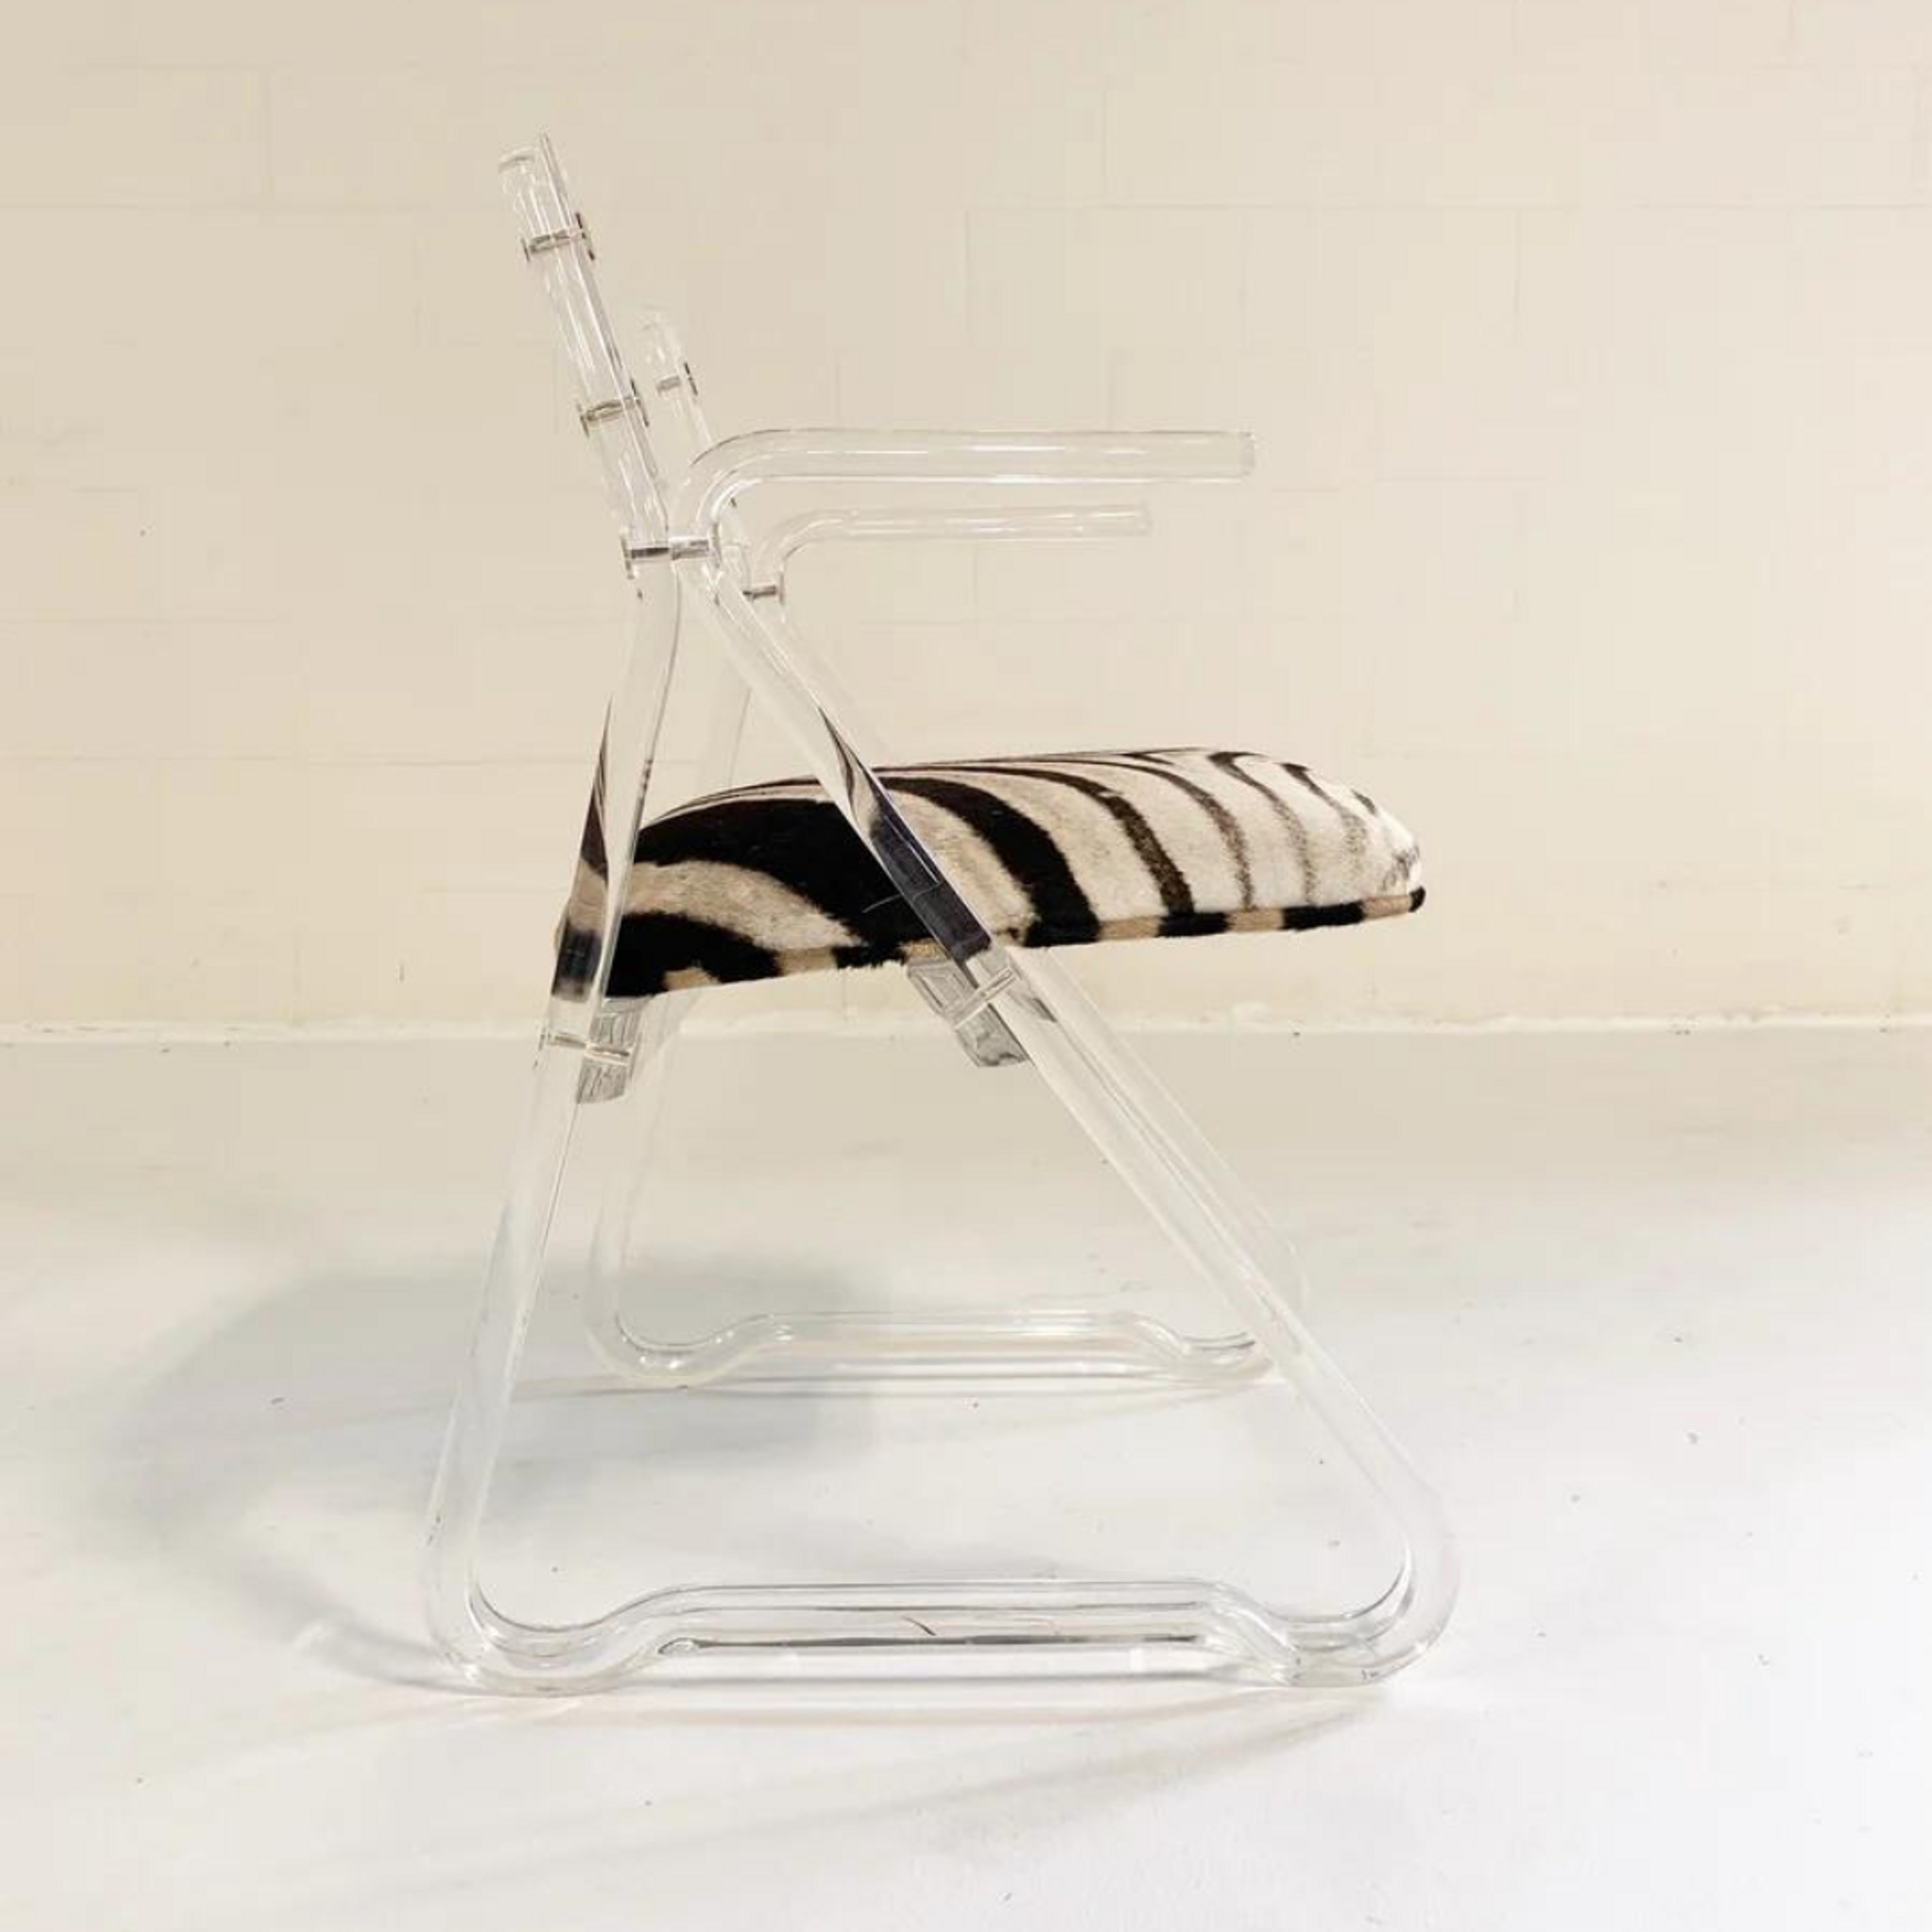 Acrylic Barrel Game Chair with Zebra Printed Seat